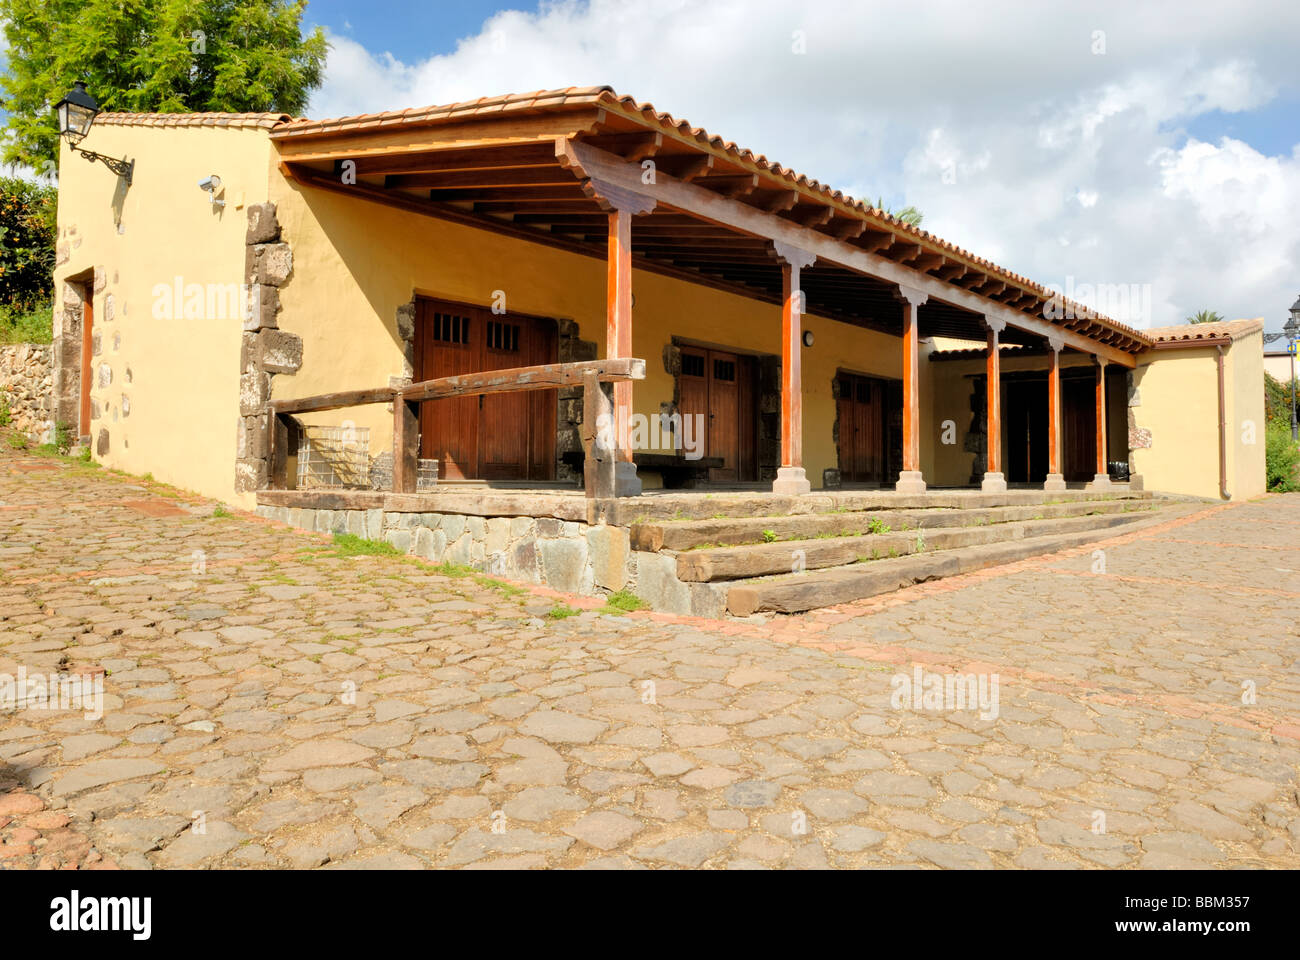 The Main building of the Parque Agricola del Guiniguada, The Guiniguada Agricultural Park. The park has some farm animals and .. Stock Photo